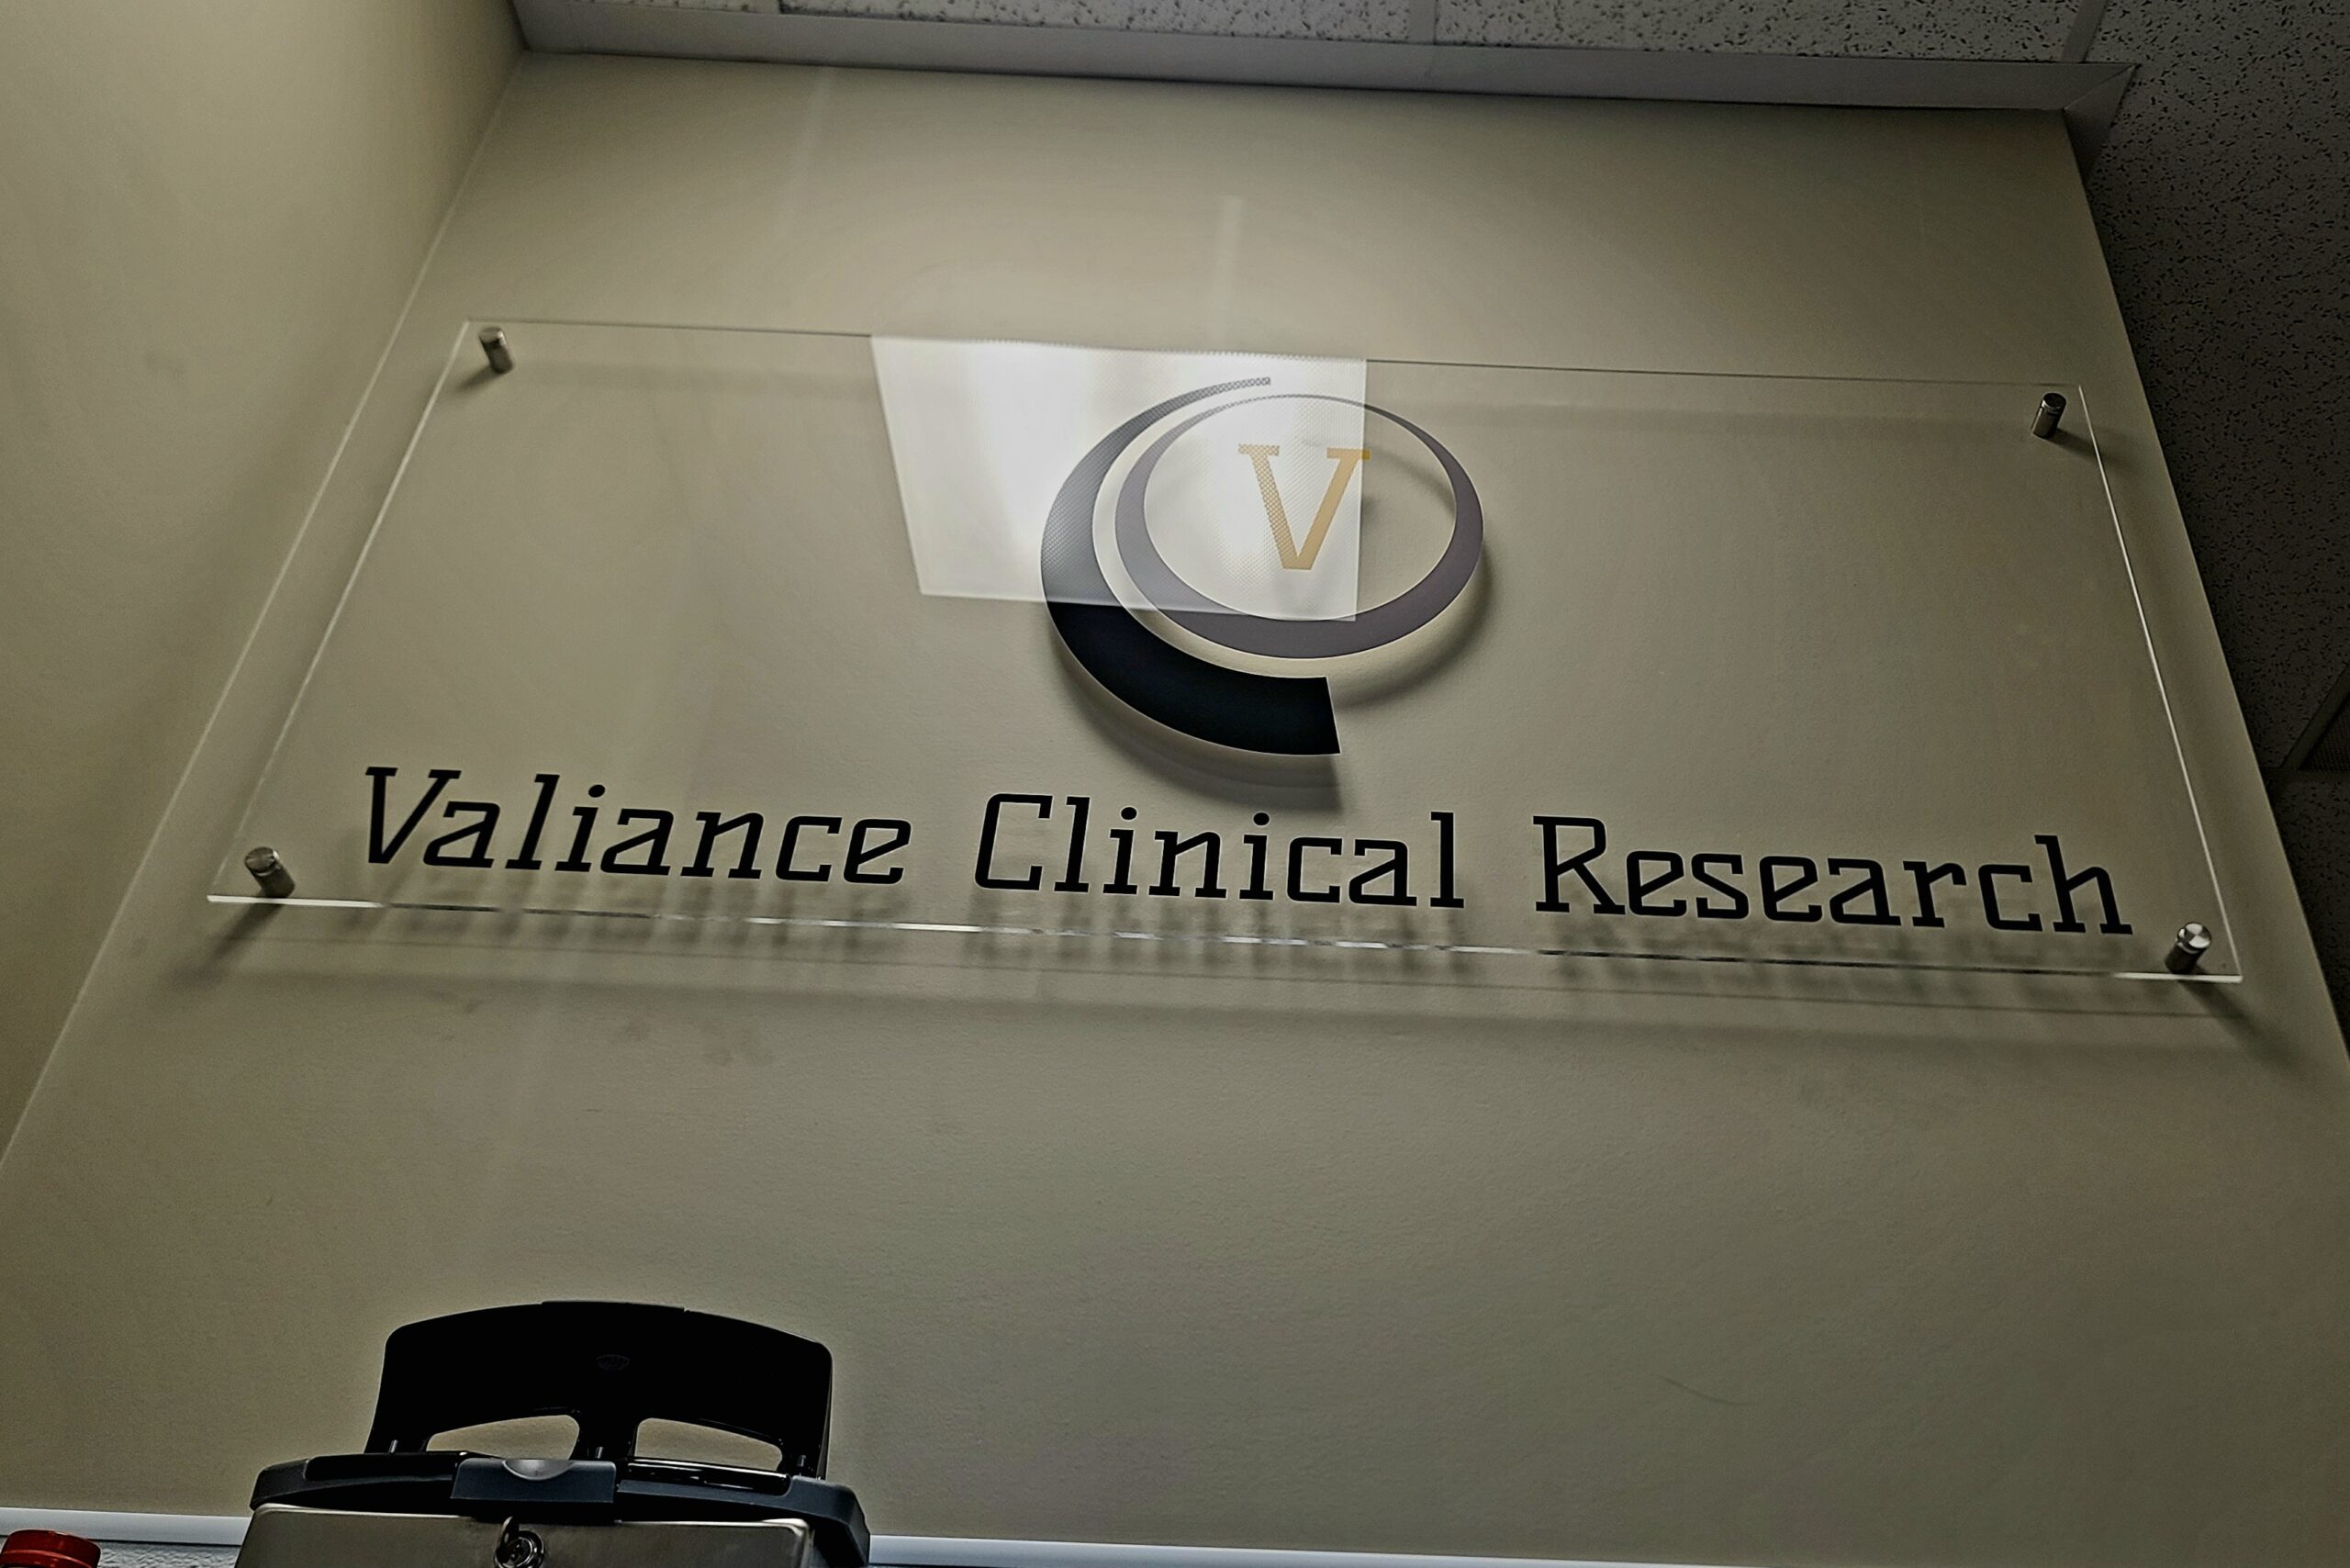 Valiance Clinical Research lobby sign: Sleek, professional, impressive branding at South Gate